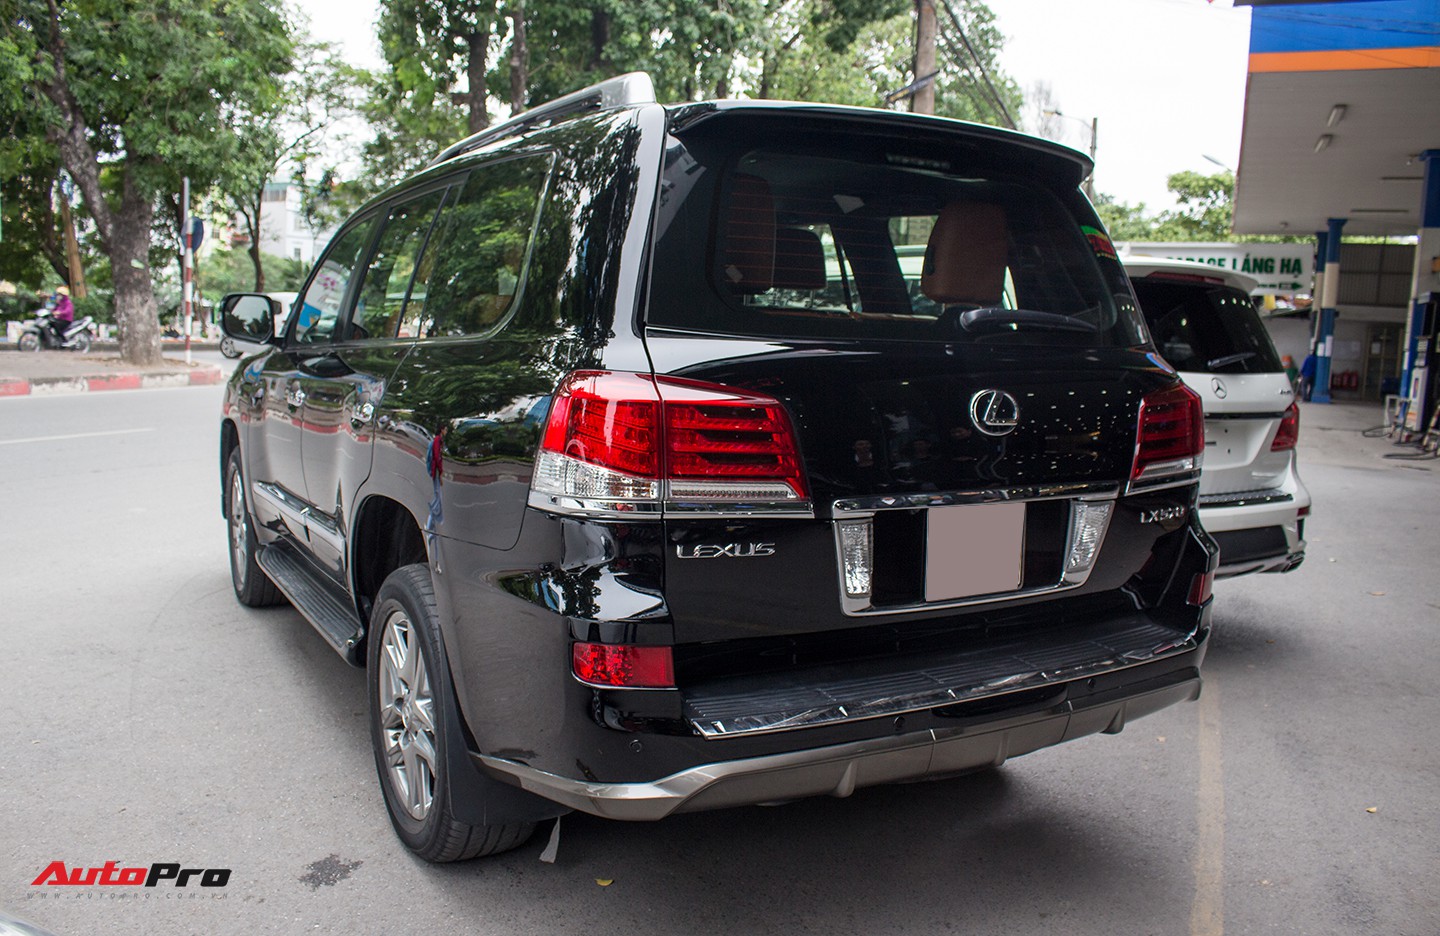 2015 Lexus LX570 Test 8211 Review 8211 Car and Driver